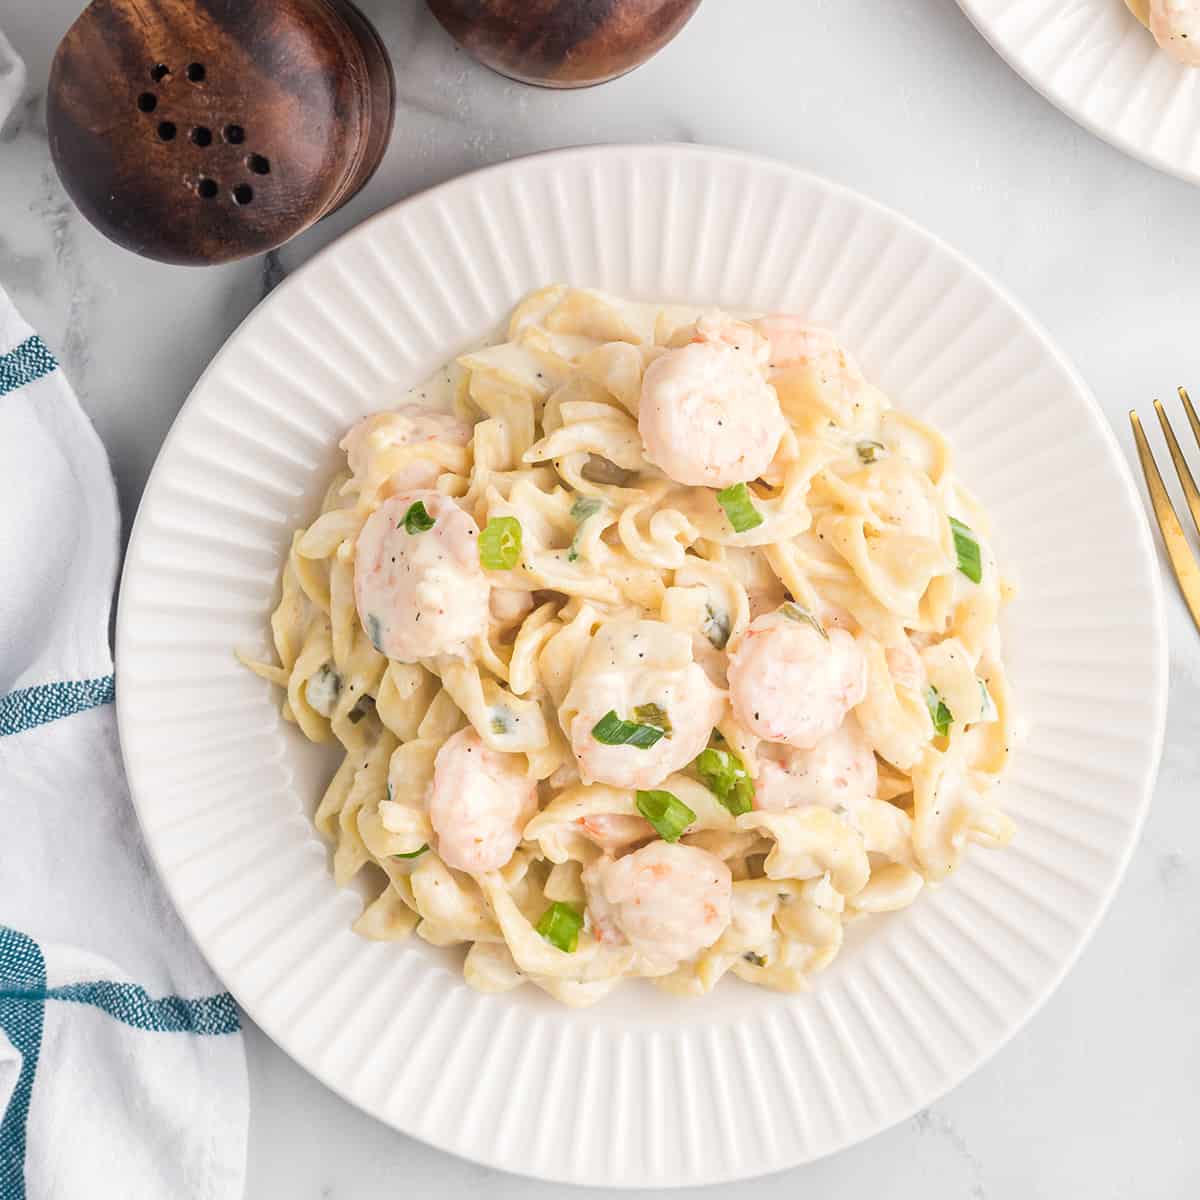 A serving of creamy shrimp pasta on a white plate.